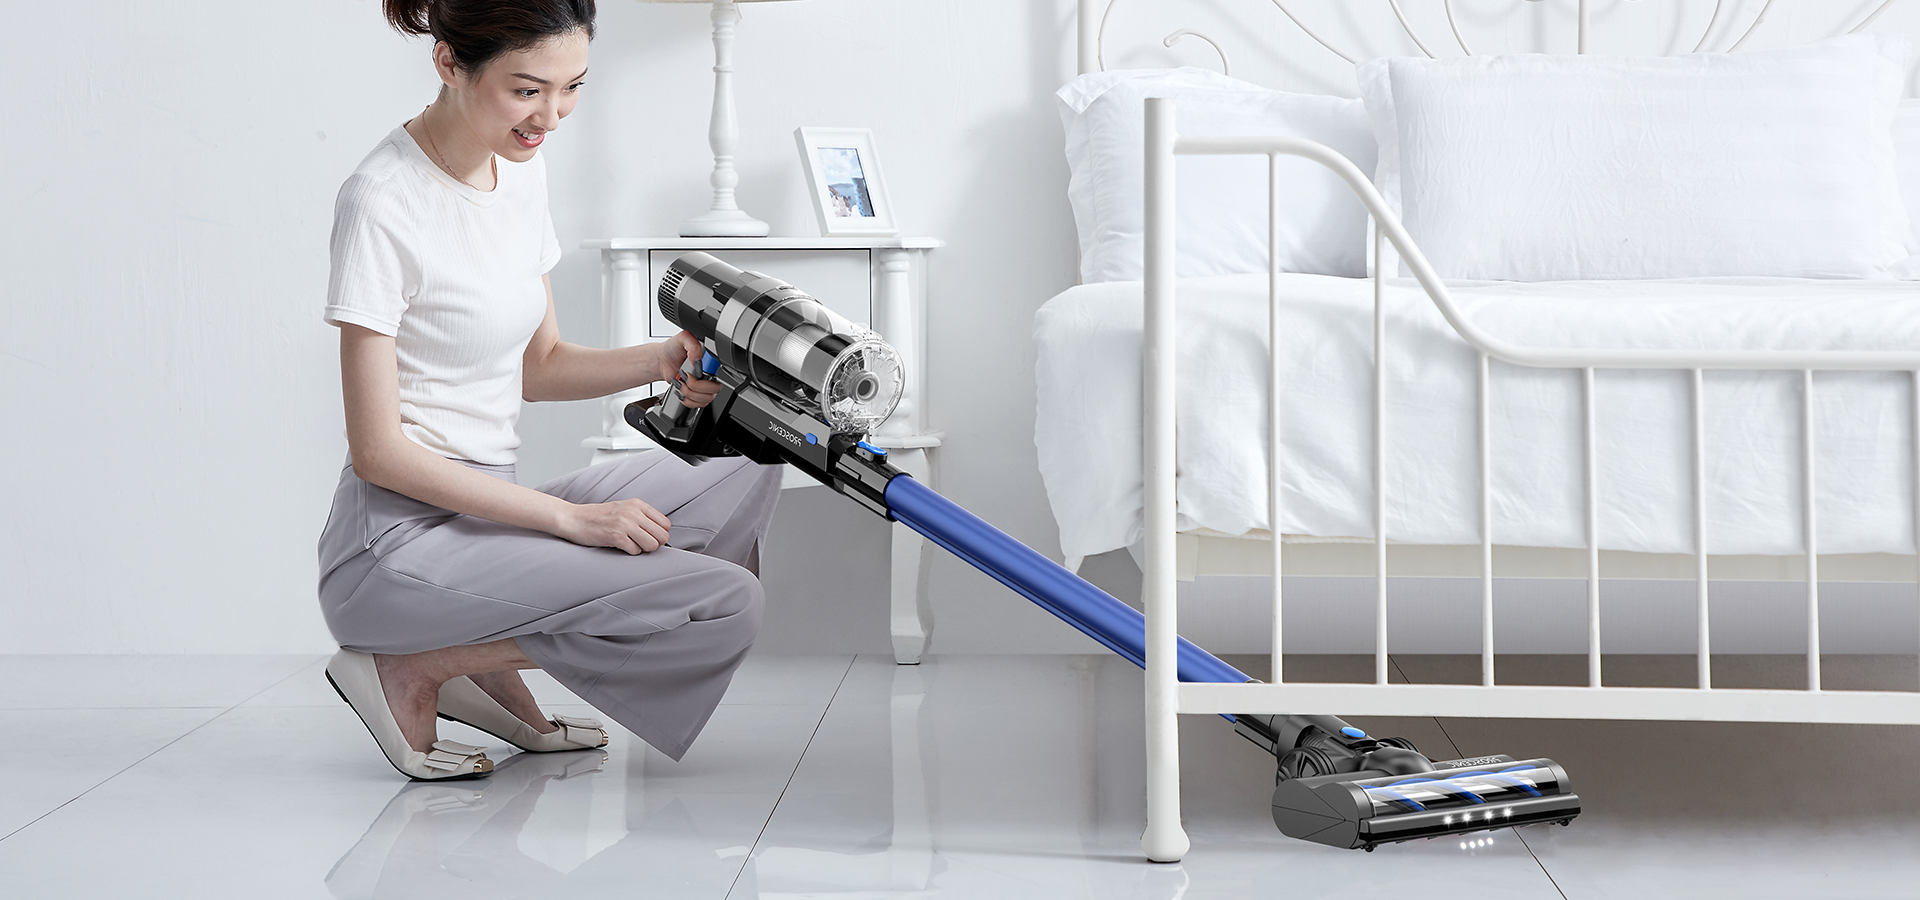 Dyson vs. Bissell: How Do They Compare?